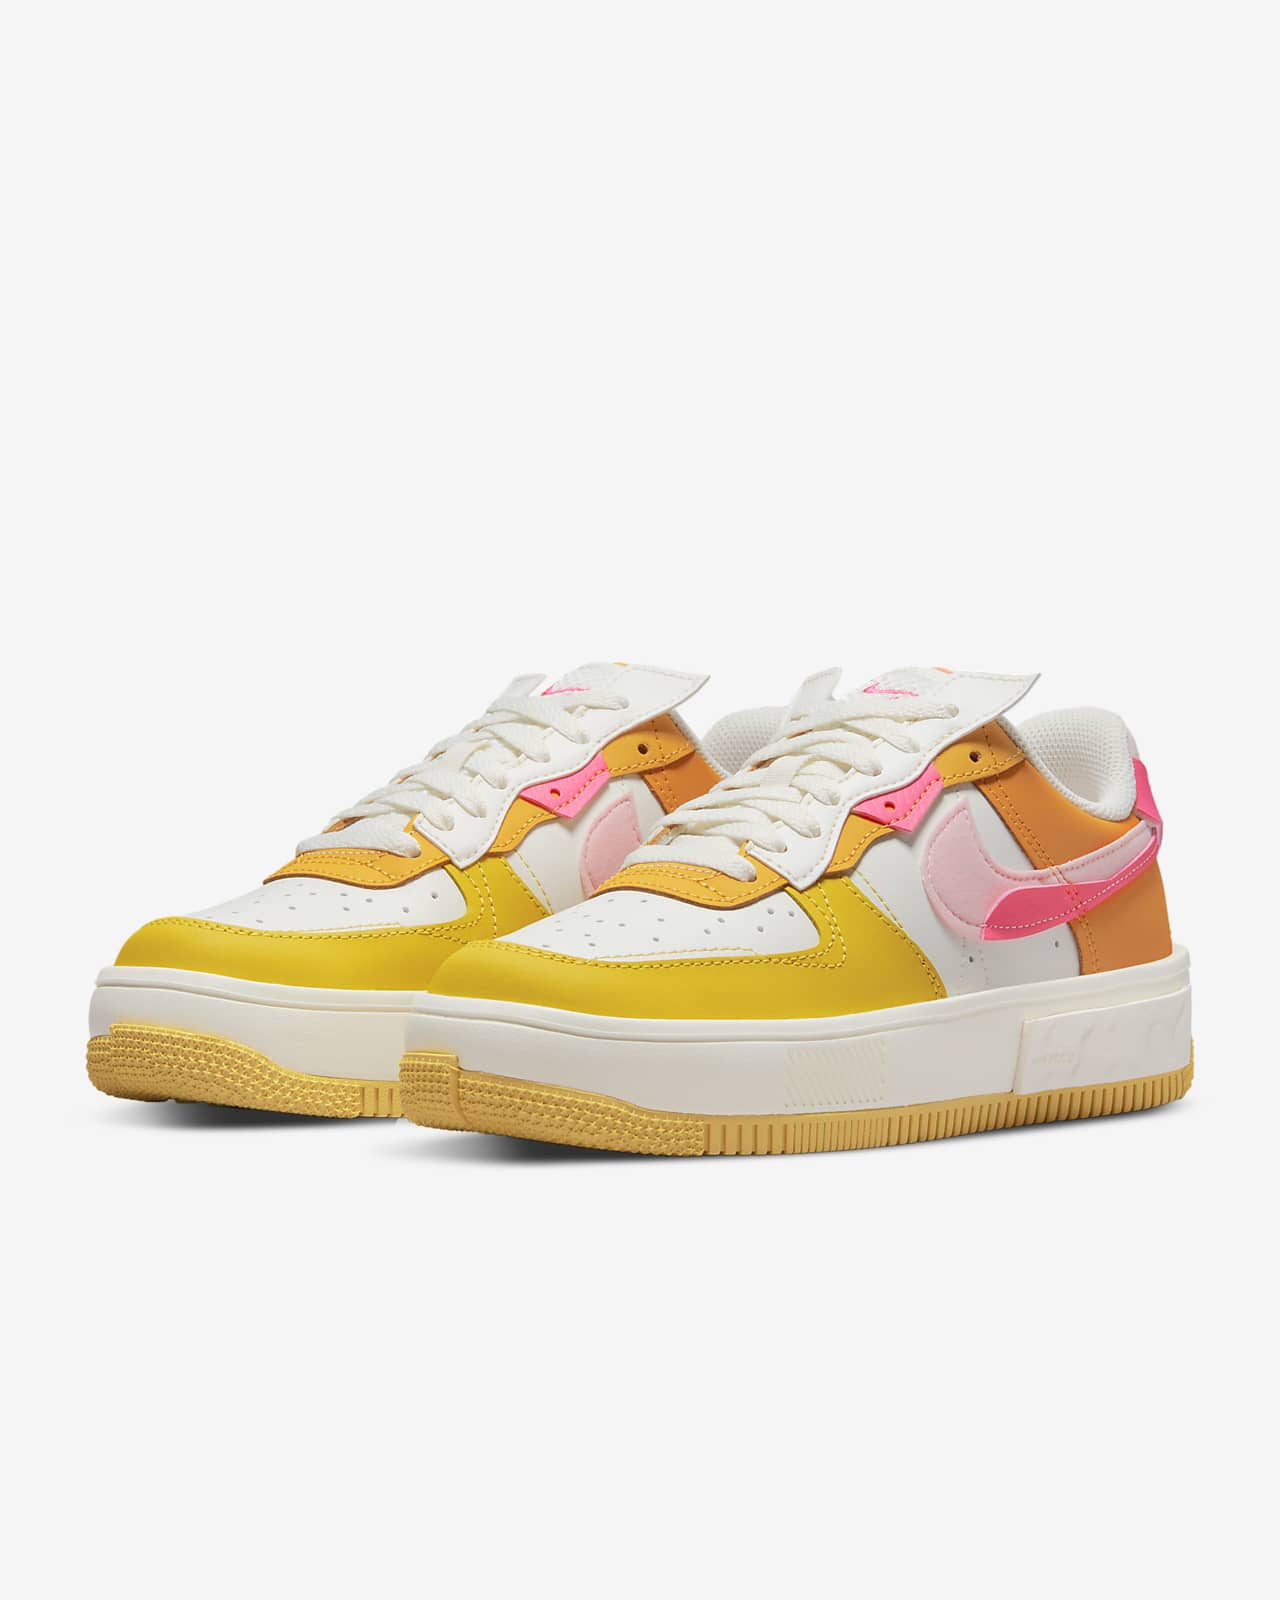 Sneakers and shoes Nike Air Force 1